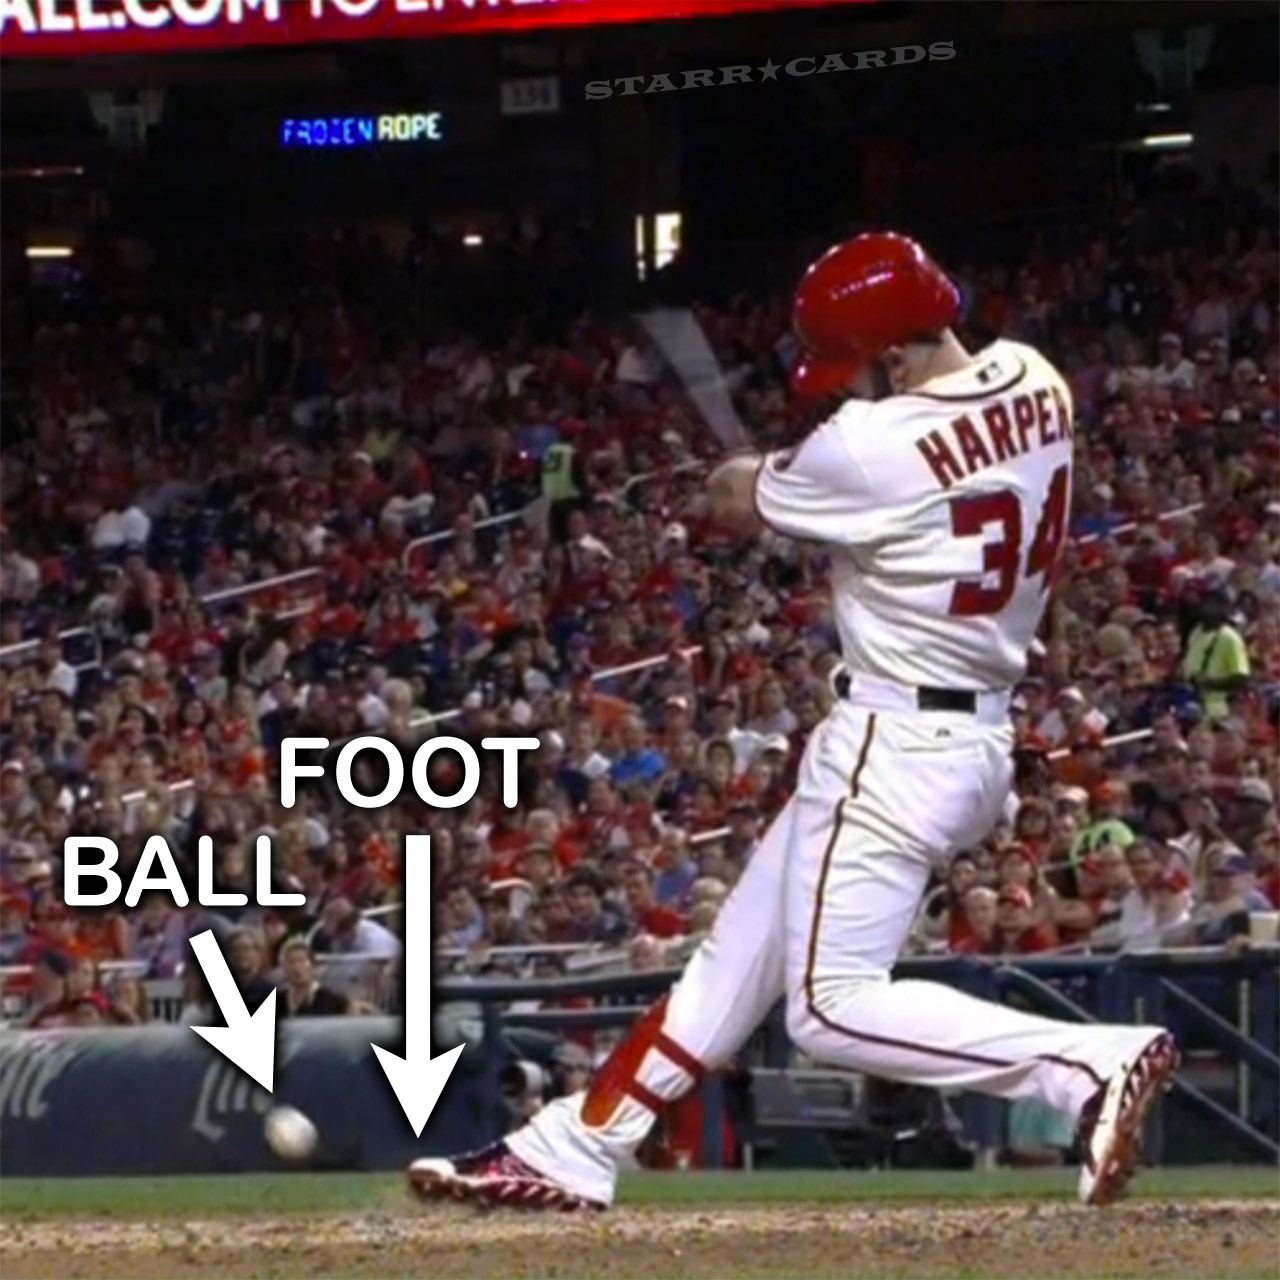 Bryce Harper pretends to have ball fouled off his foot